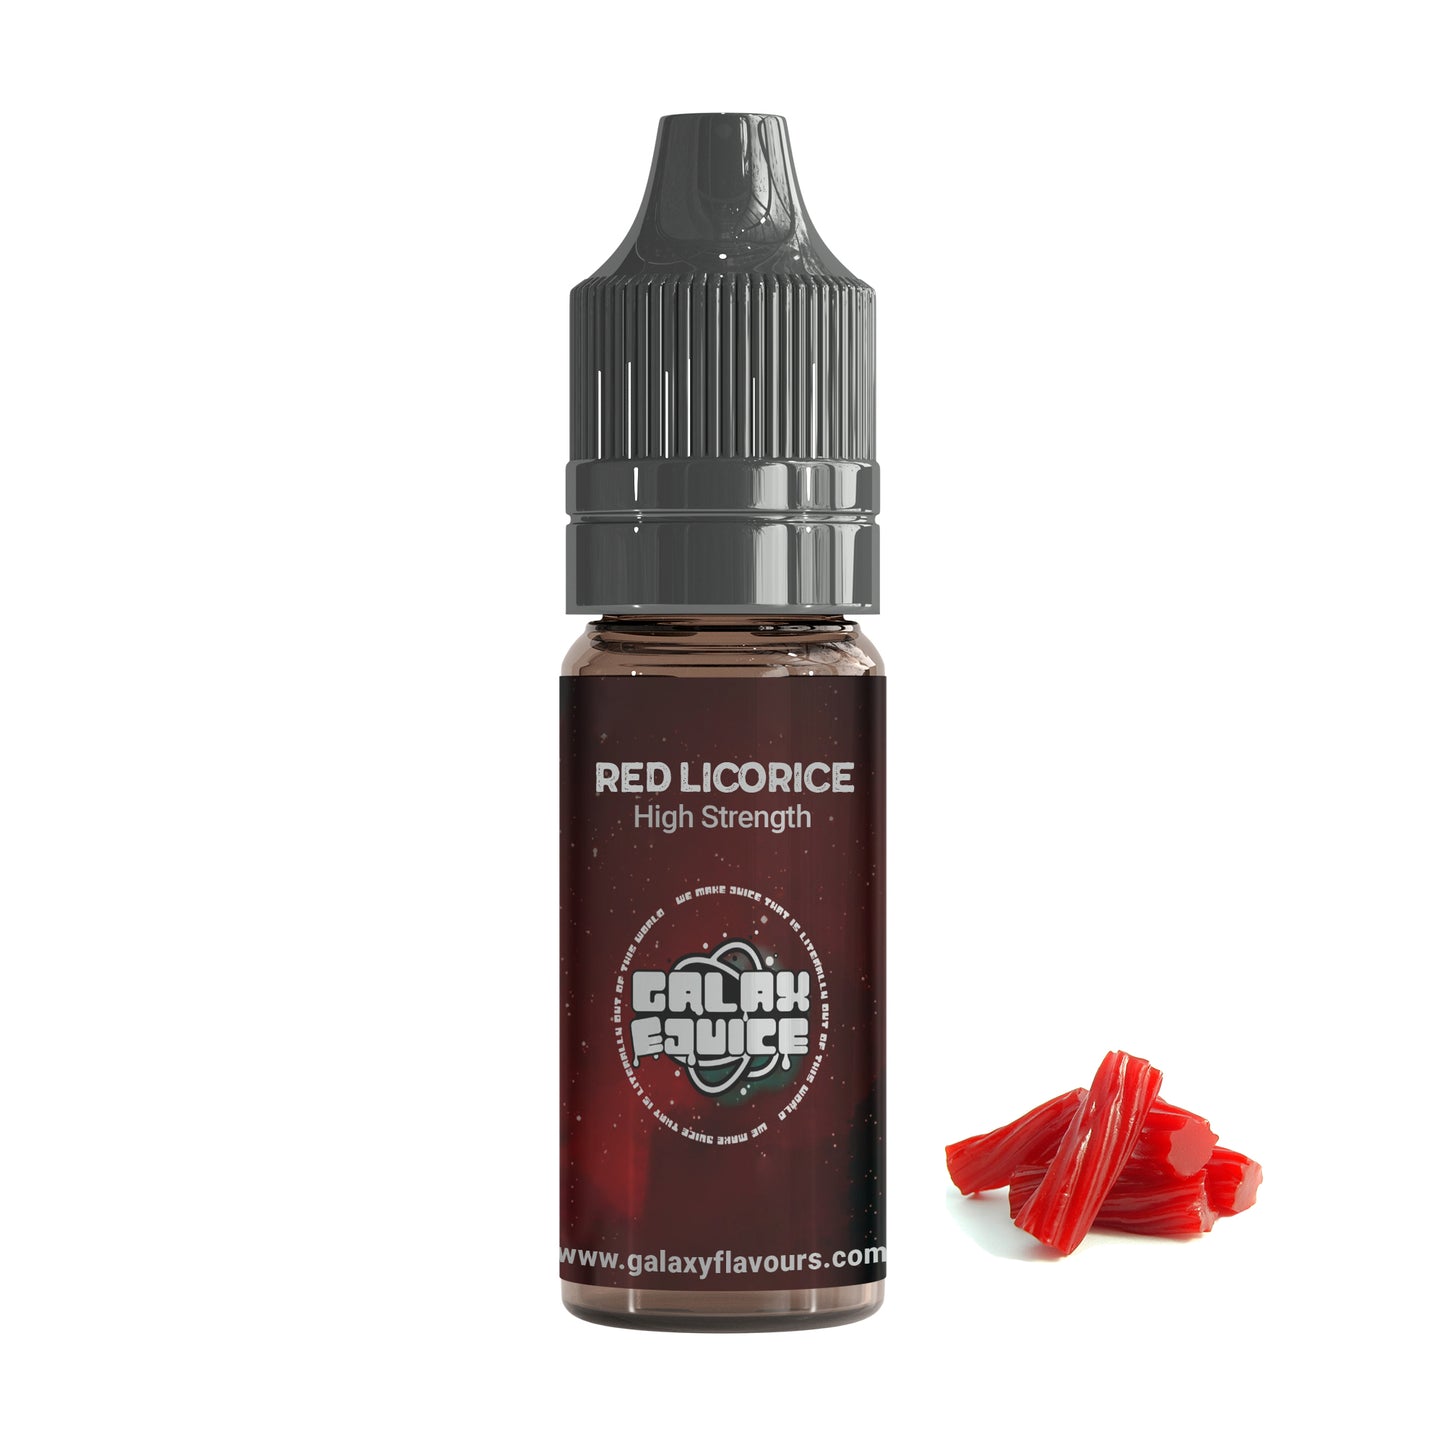 Red Licorice High Strength Professional Flavouring.